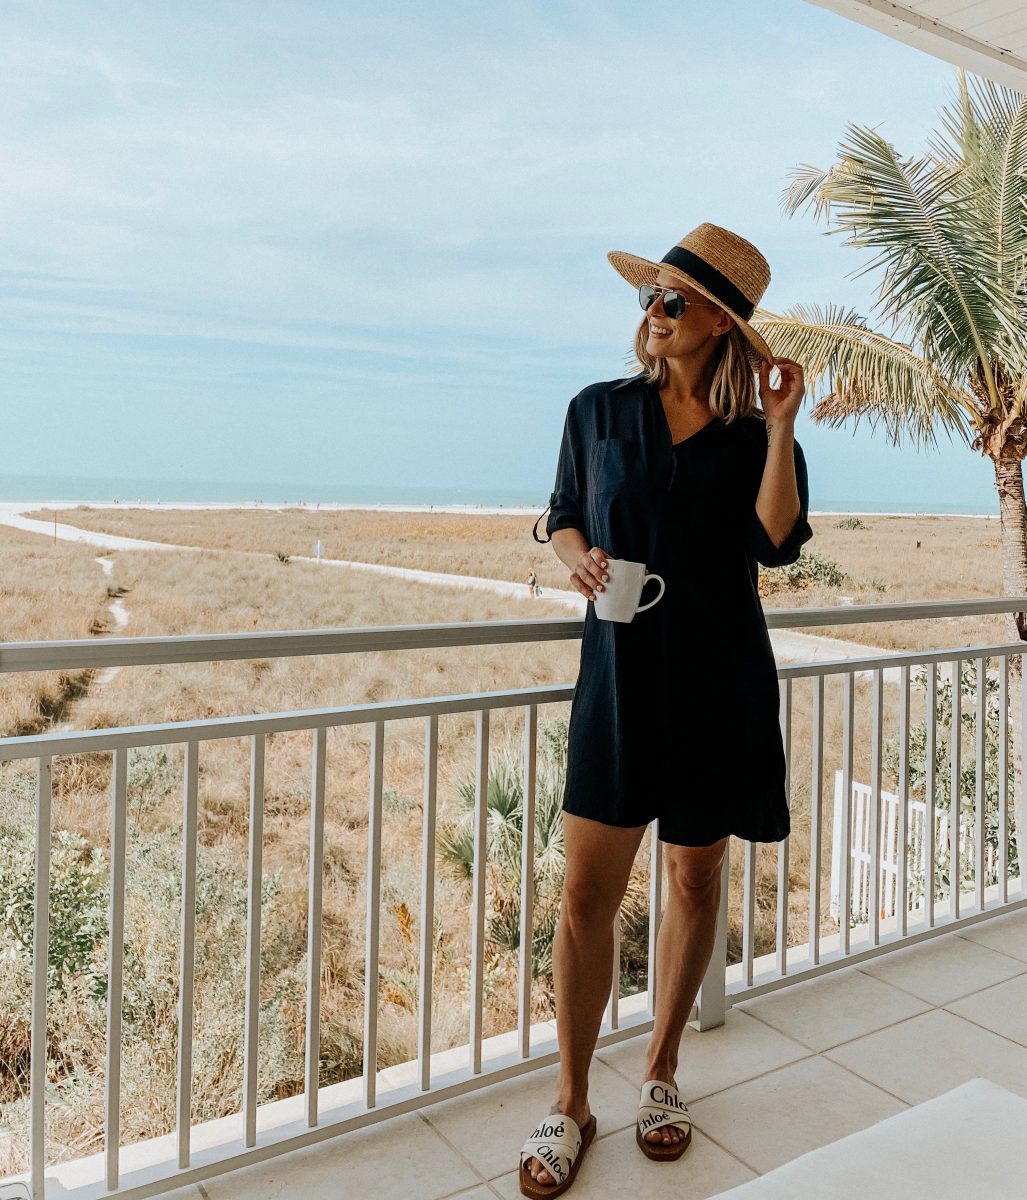 Suzanne wearing a swimsuit cover up, straw hat, sandals and sunglasses while holding a cup of coffee on the balcony overlooking the beach 